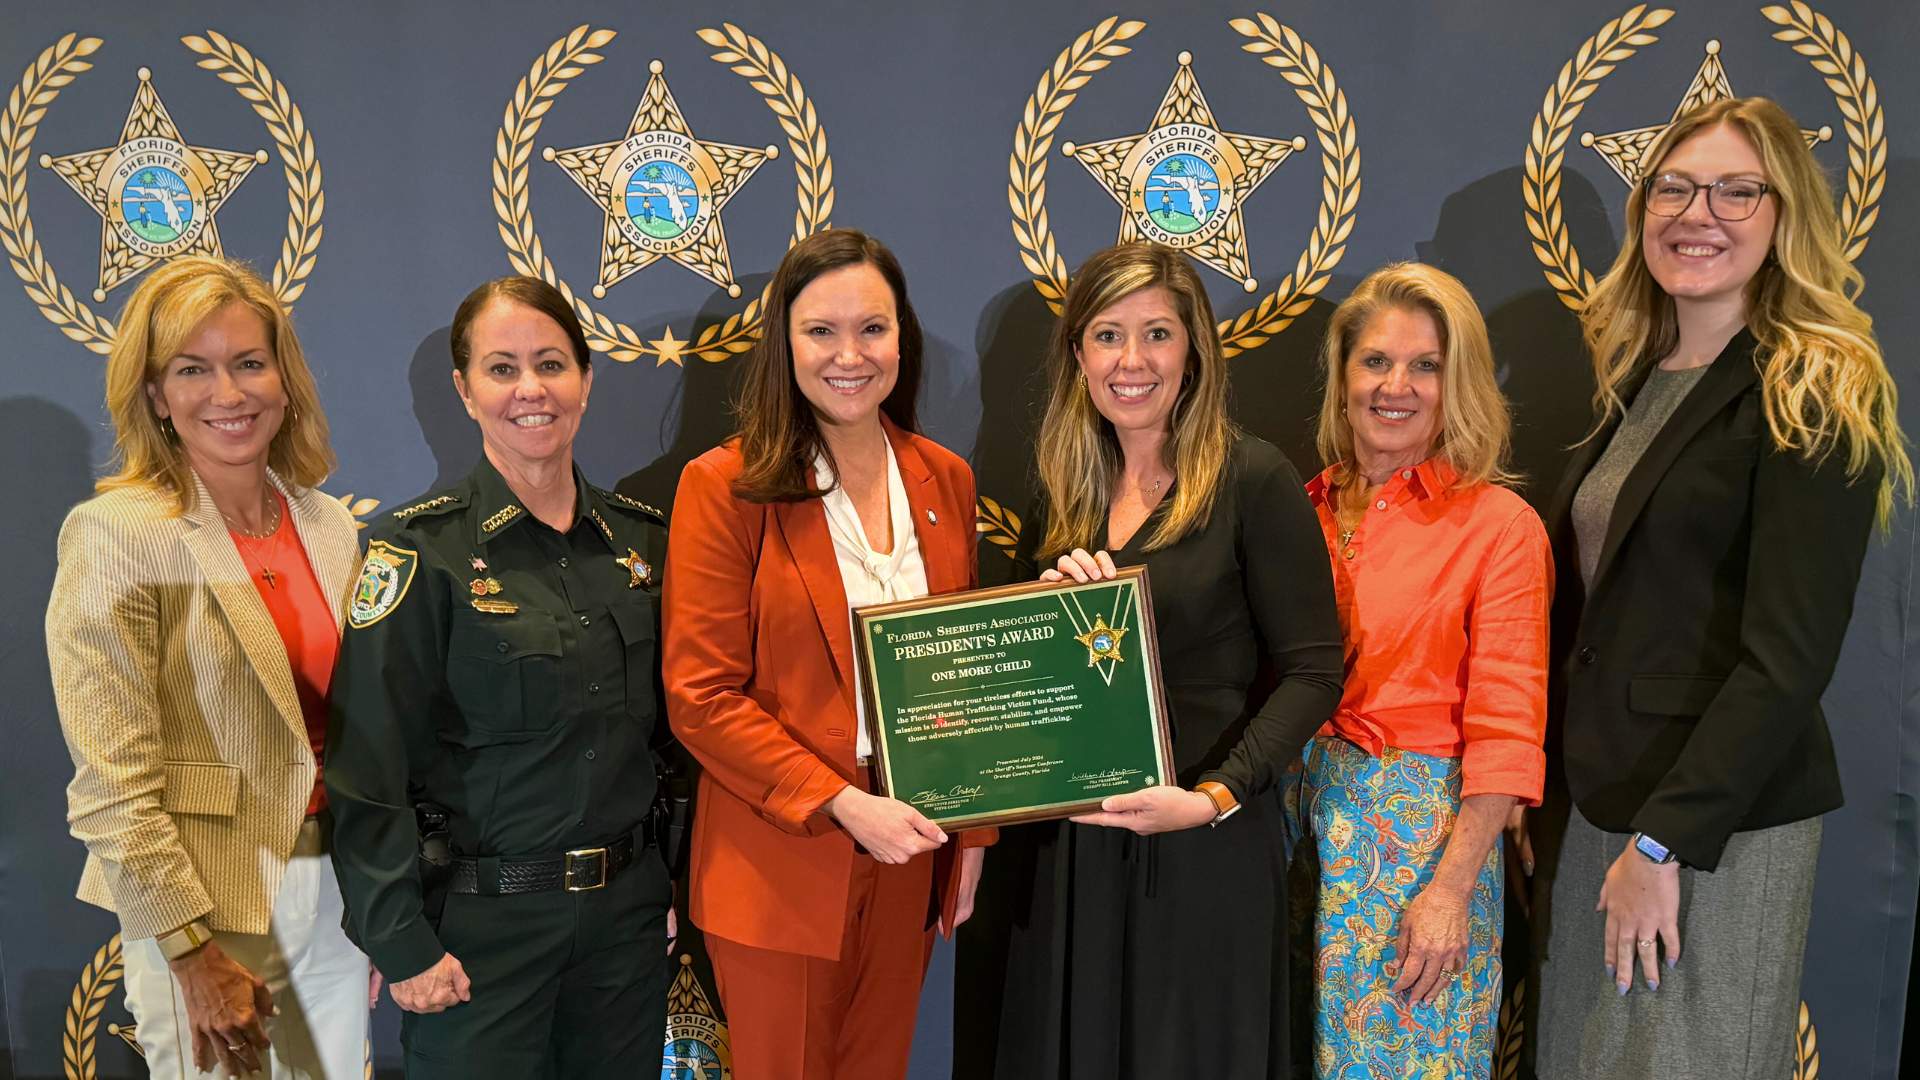 Jodi Domangue, One More Child Vice President of Program Operations and Public Policy at One More Child, receives President’s Award from the Florida Sheriffs Association.